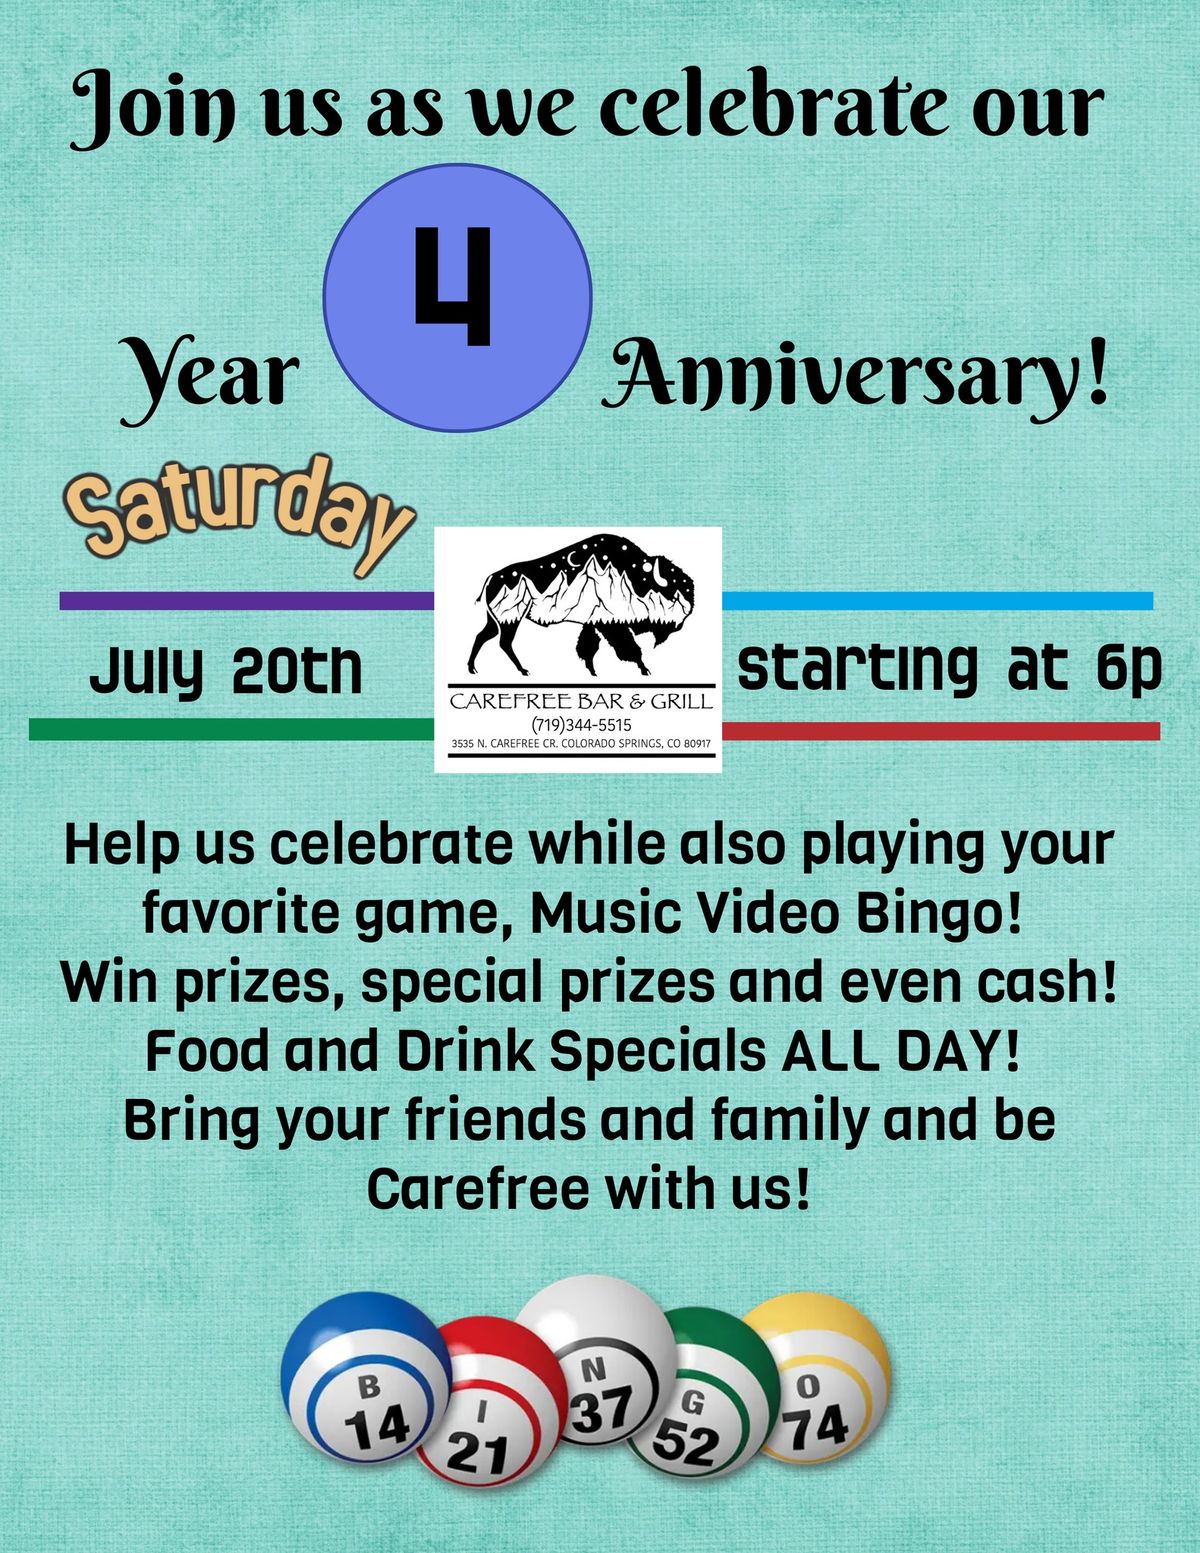 Carefree Bar & Grill's 4 Year Anniversary & Bingo Party